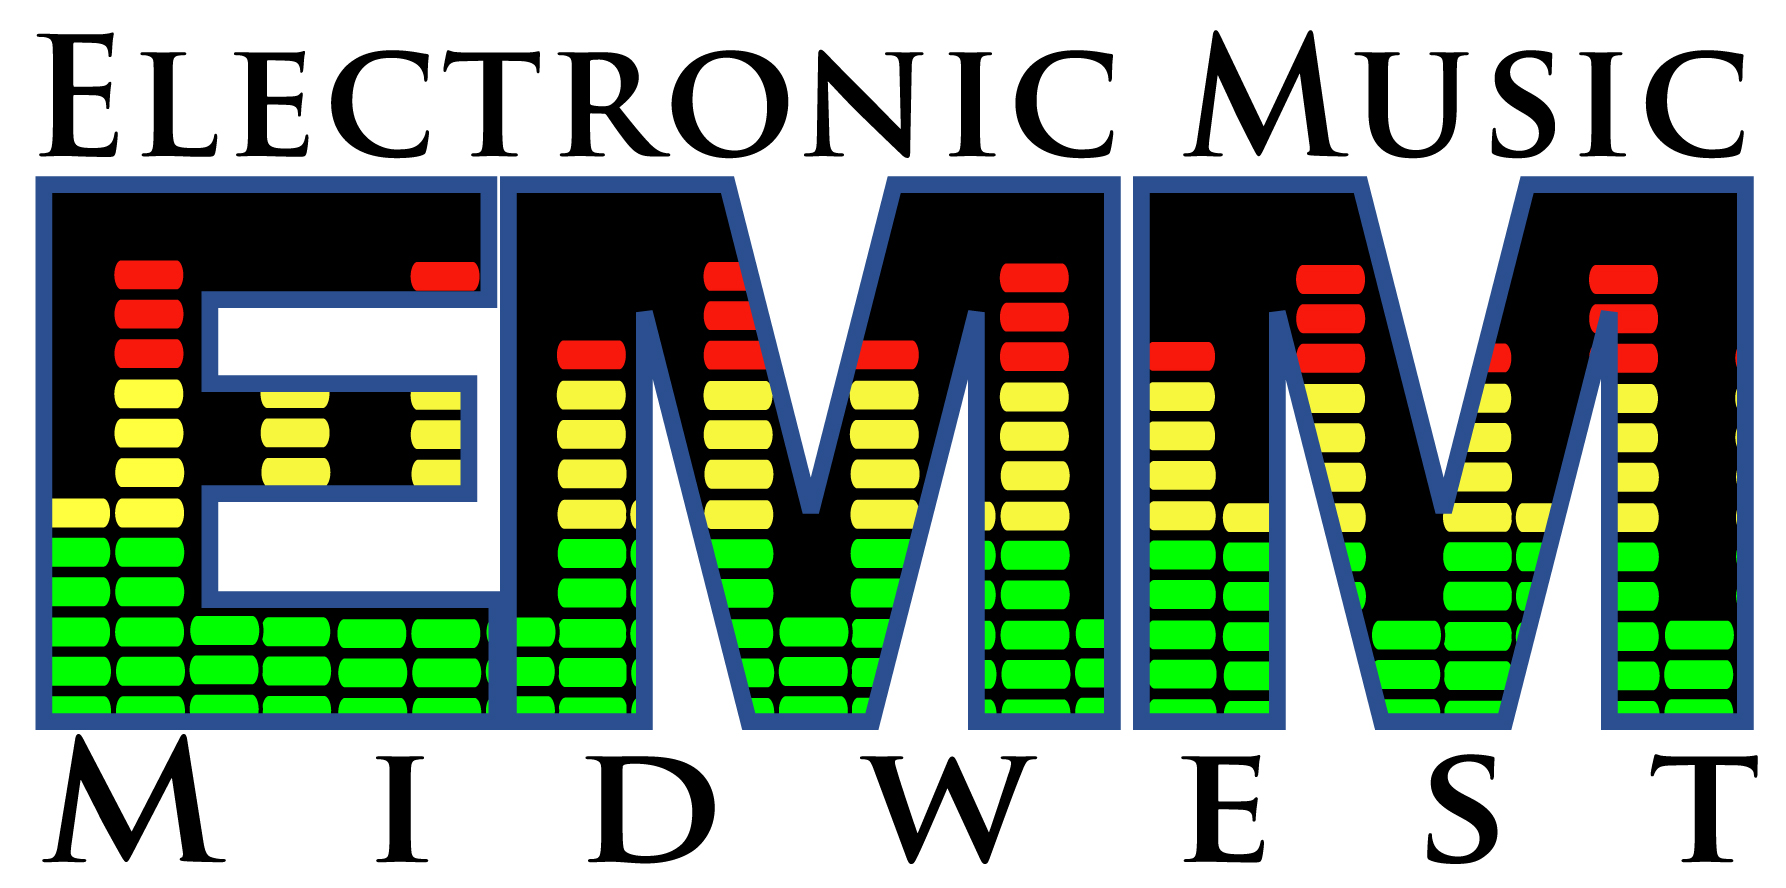 Electronic Music Midwest